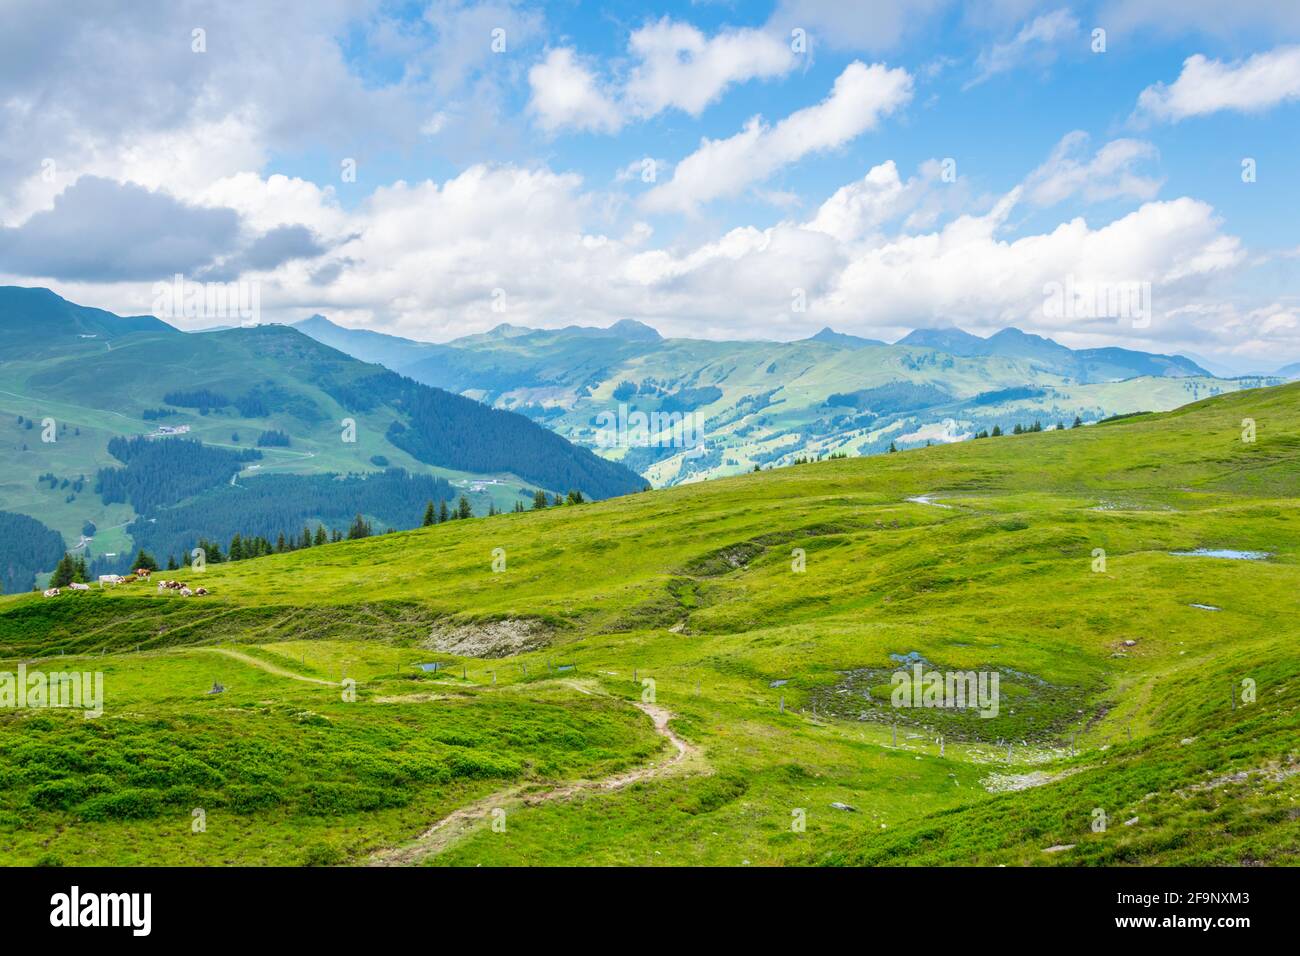 View of the alps along the famous hiking trail Pinzgauer spaziergang near Zell am See, Salzburg region, Austria. Stock Photo